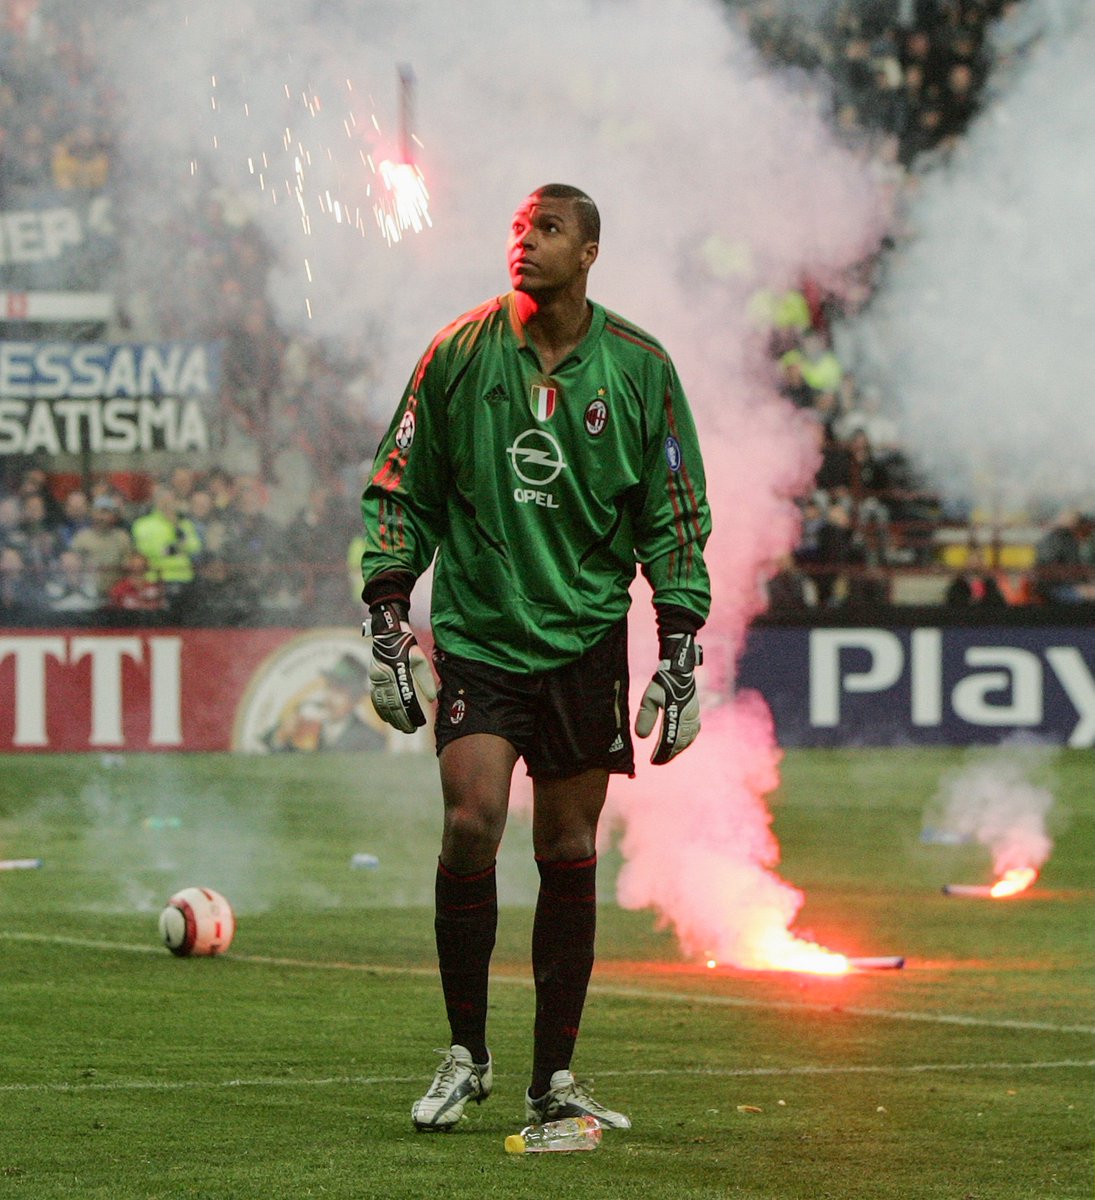 B/R Football on Twitter: "On this day in 2005, AC Milan vs. Inter Milan was  abandoned due to flares being thrown onto the pitch. Goalkeeper Dida was  struck by one, while Marco